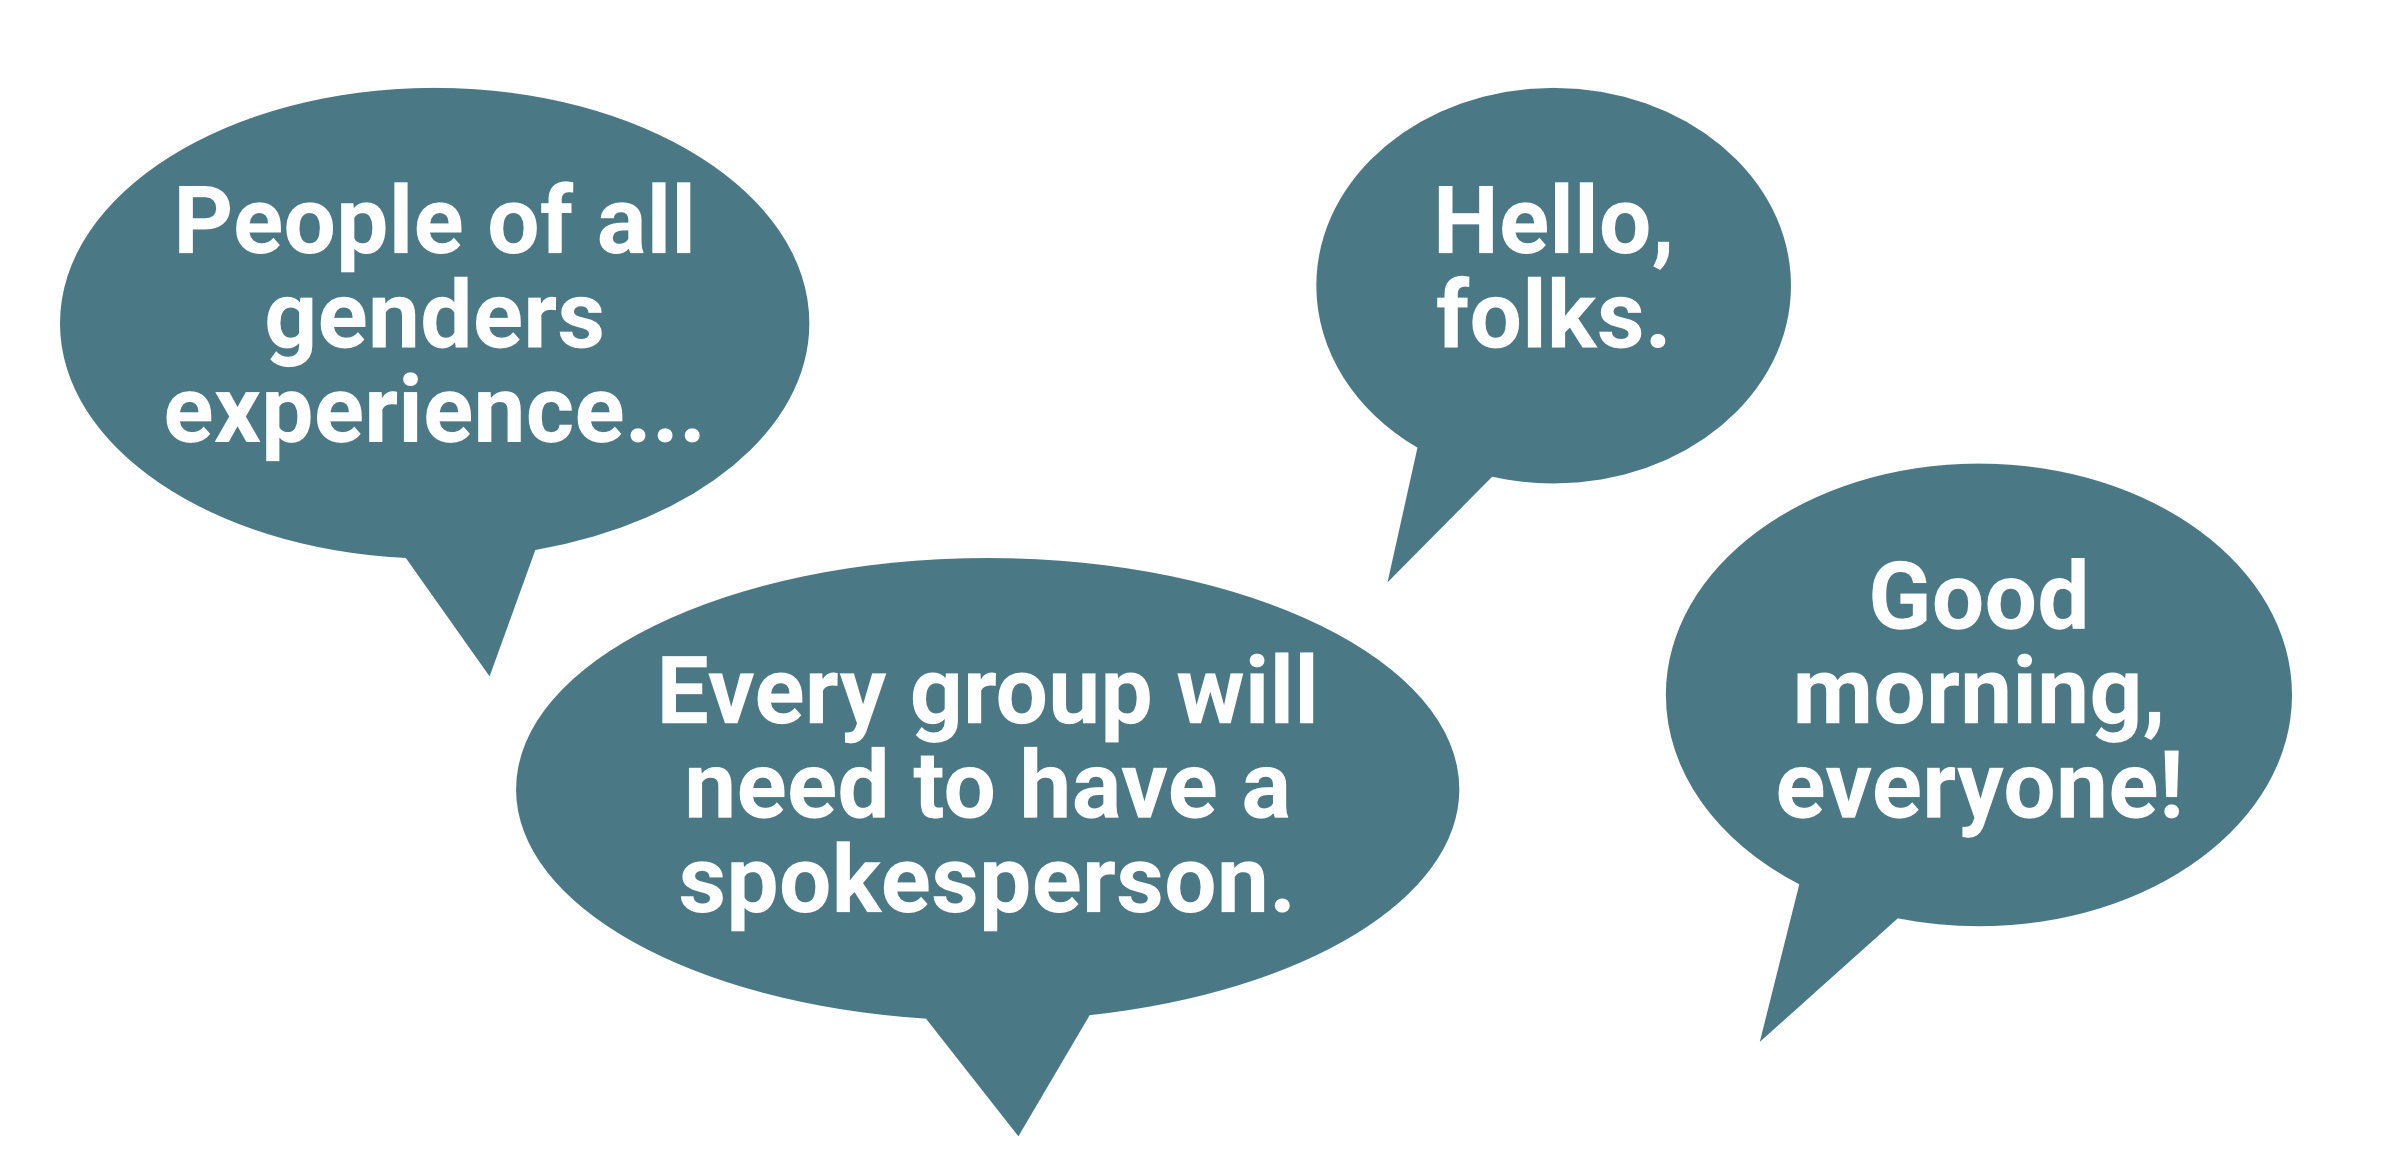 Speech bubbles with different greetings: People of all genders experience; hello folks; every group will need to have a spokesperson; good morning everyone.